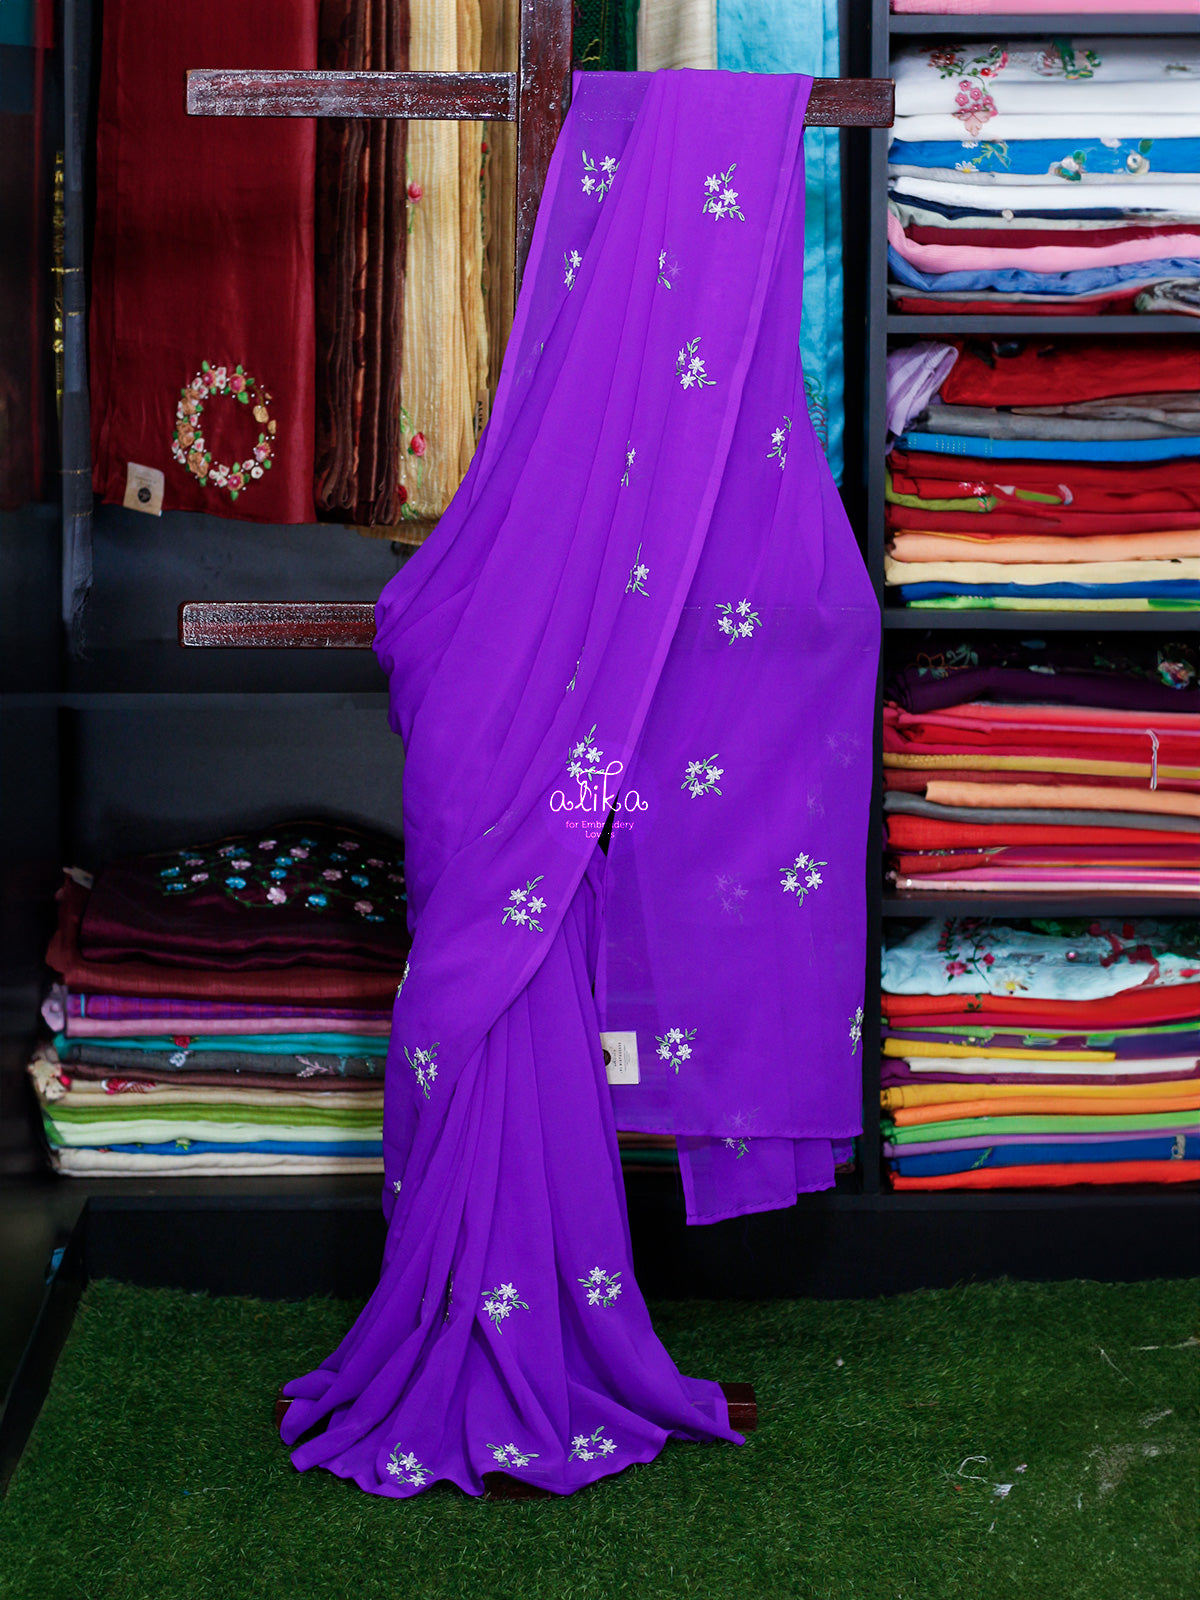 VIOLET ORGANZA SAREE WITH LAZY DAISY HAND EMBROIDERY AND BEAD WORK